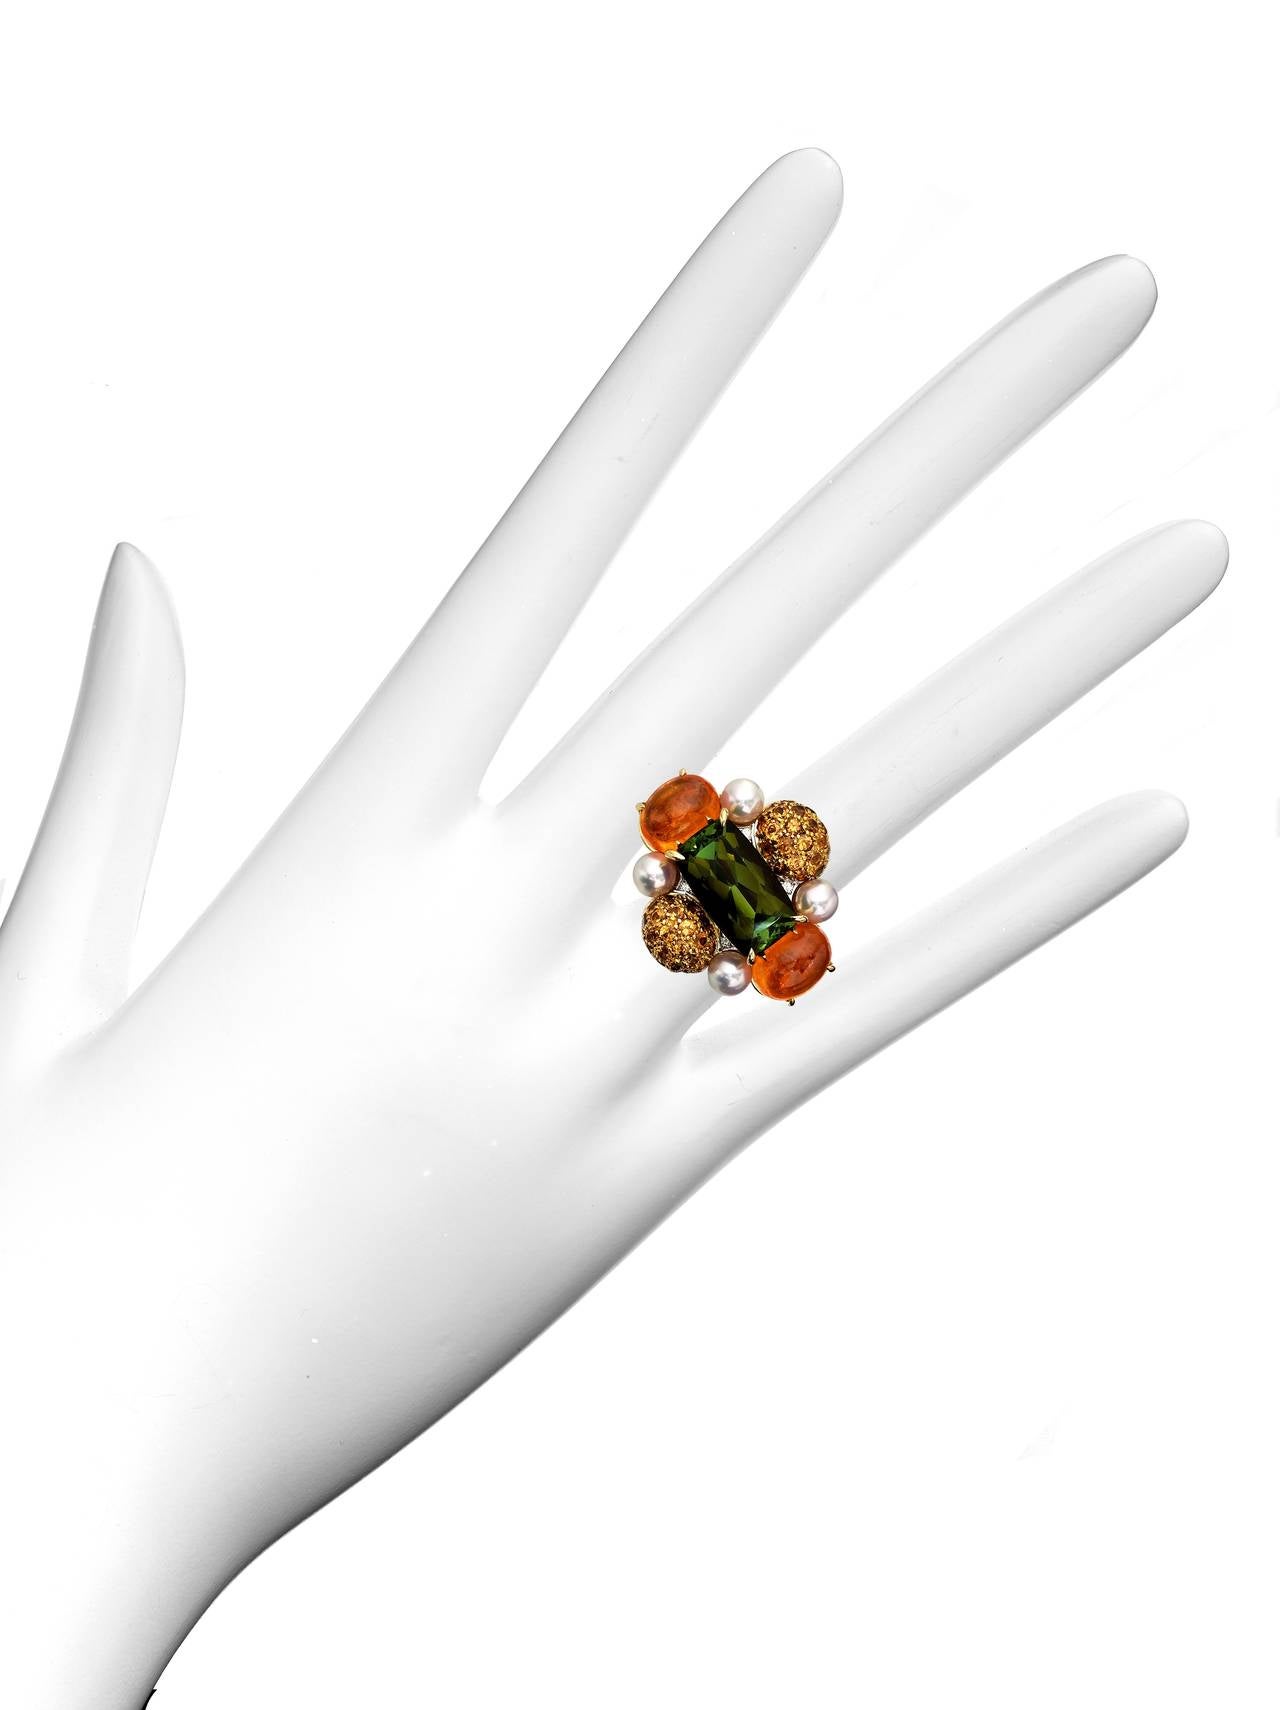 Fire Flower
One-of-a-kind, ring by Abellán New York

One-of-a-kind Mandarin Garnet Diamond Gorgeous Ring. A ring with royal vibes, featuring a gorgeous, a rectangular green Tourmaline center stone surrounded by vivid bead set Mandarin Garnets,